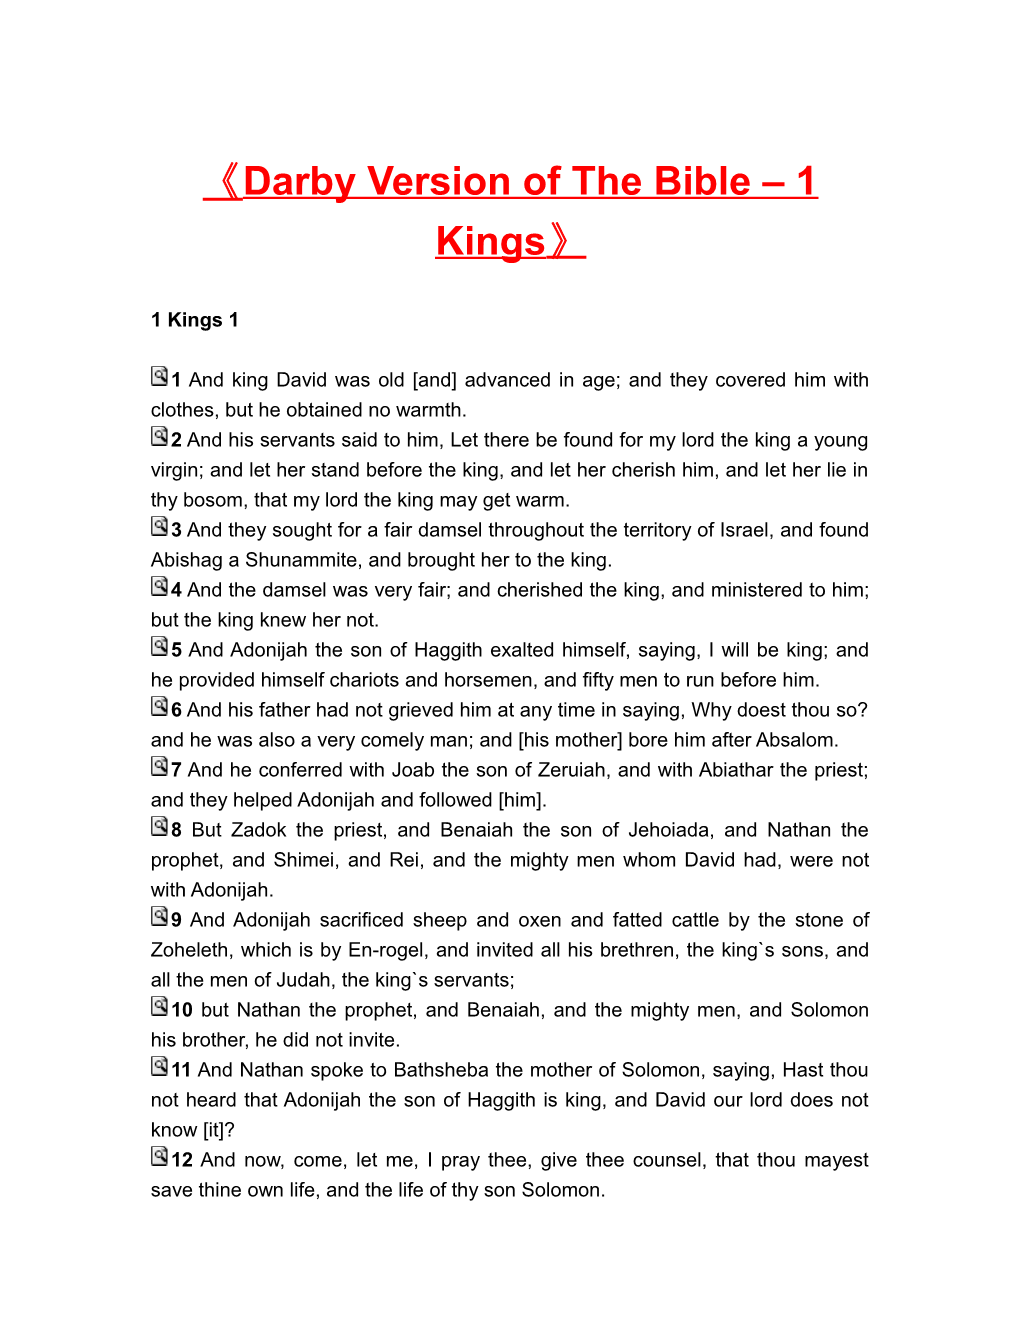 Darby Version of the Bible 1 Kings